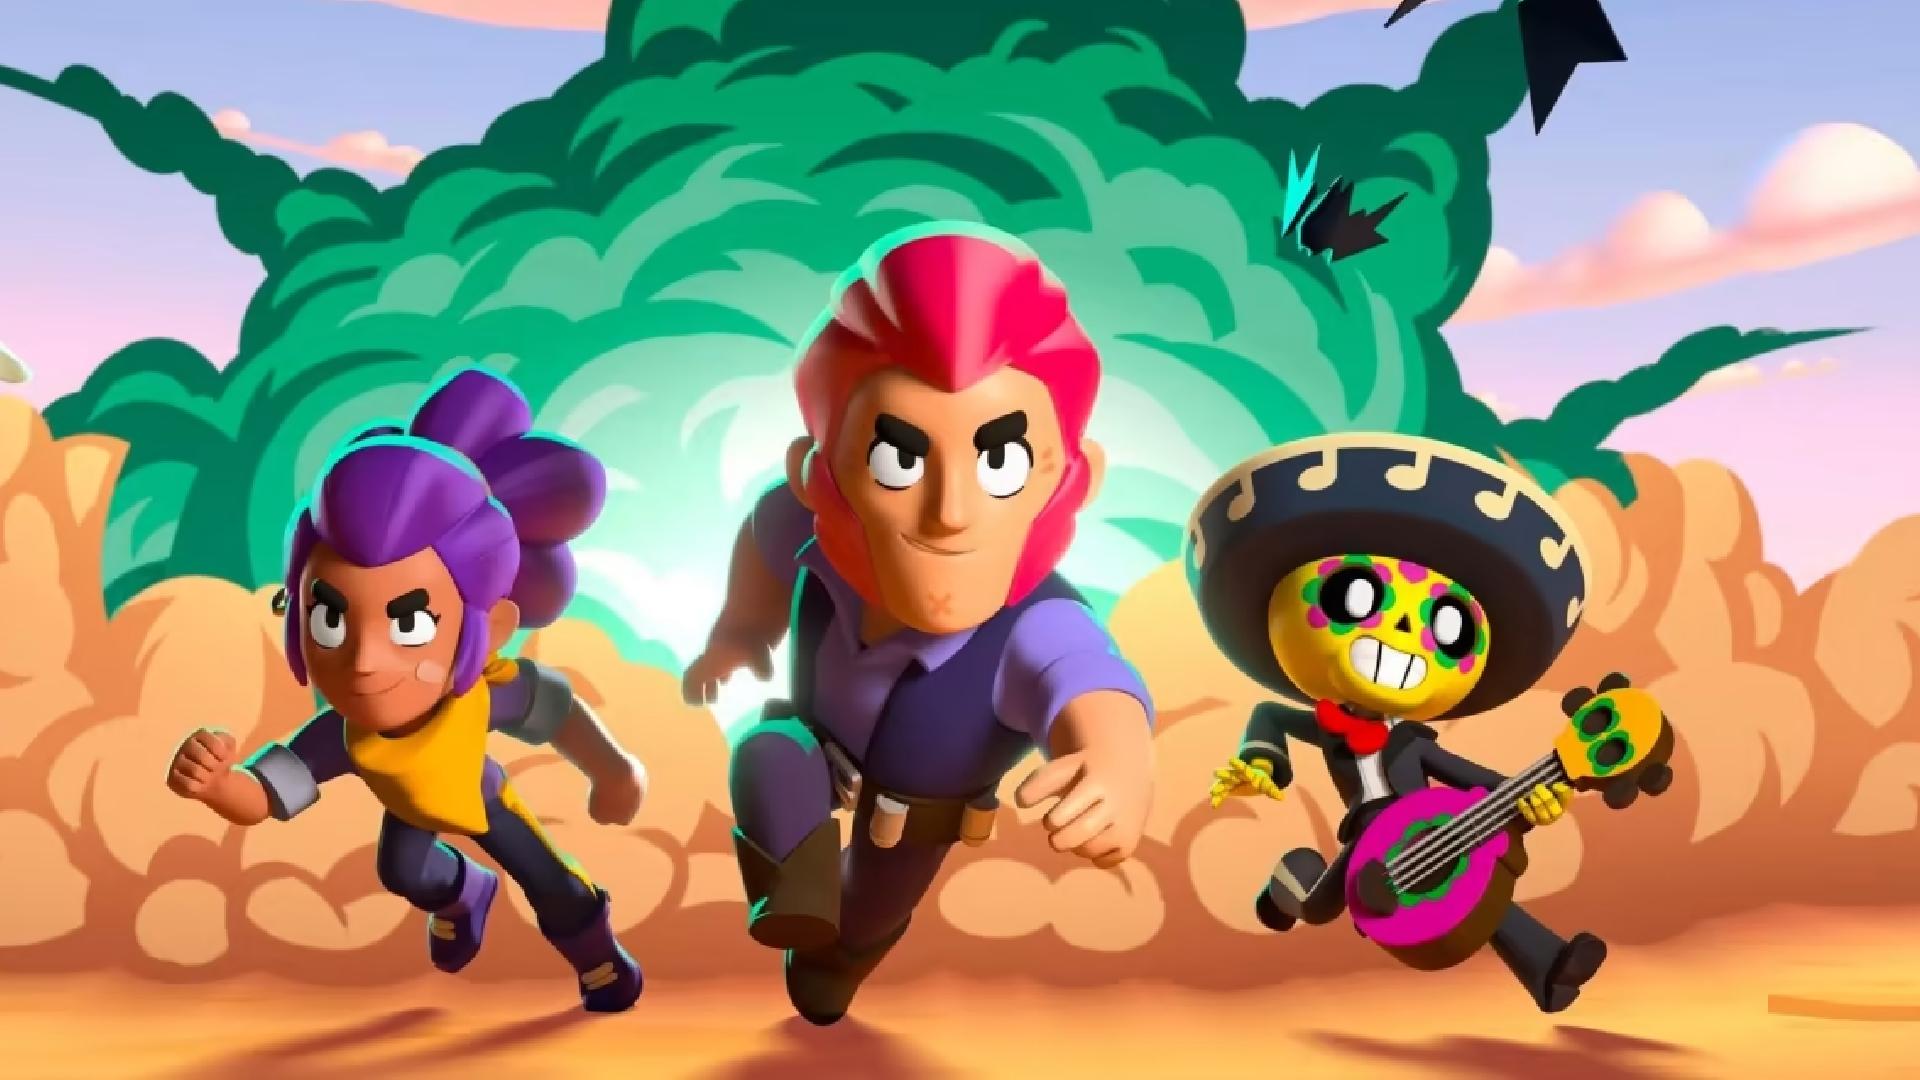 Brawl Stars: Multiple characters can be seen in key art